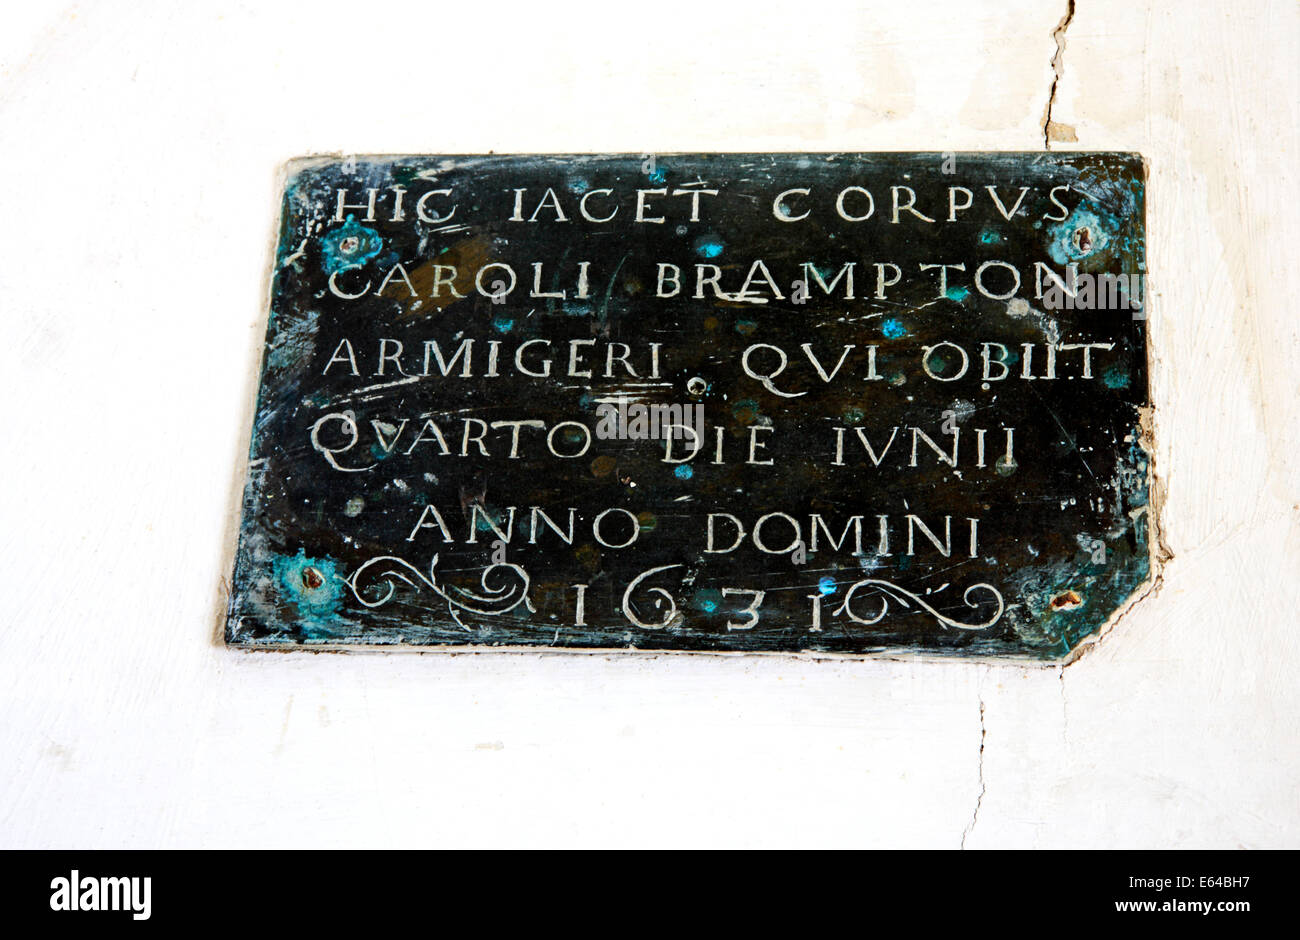 A floor brass inscription plate in the parish church of St Peter at Brampton, Norfolk, England, United Kingdom. Stock Photo